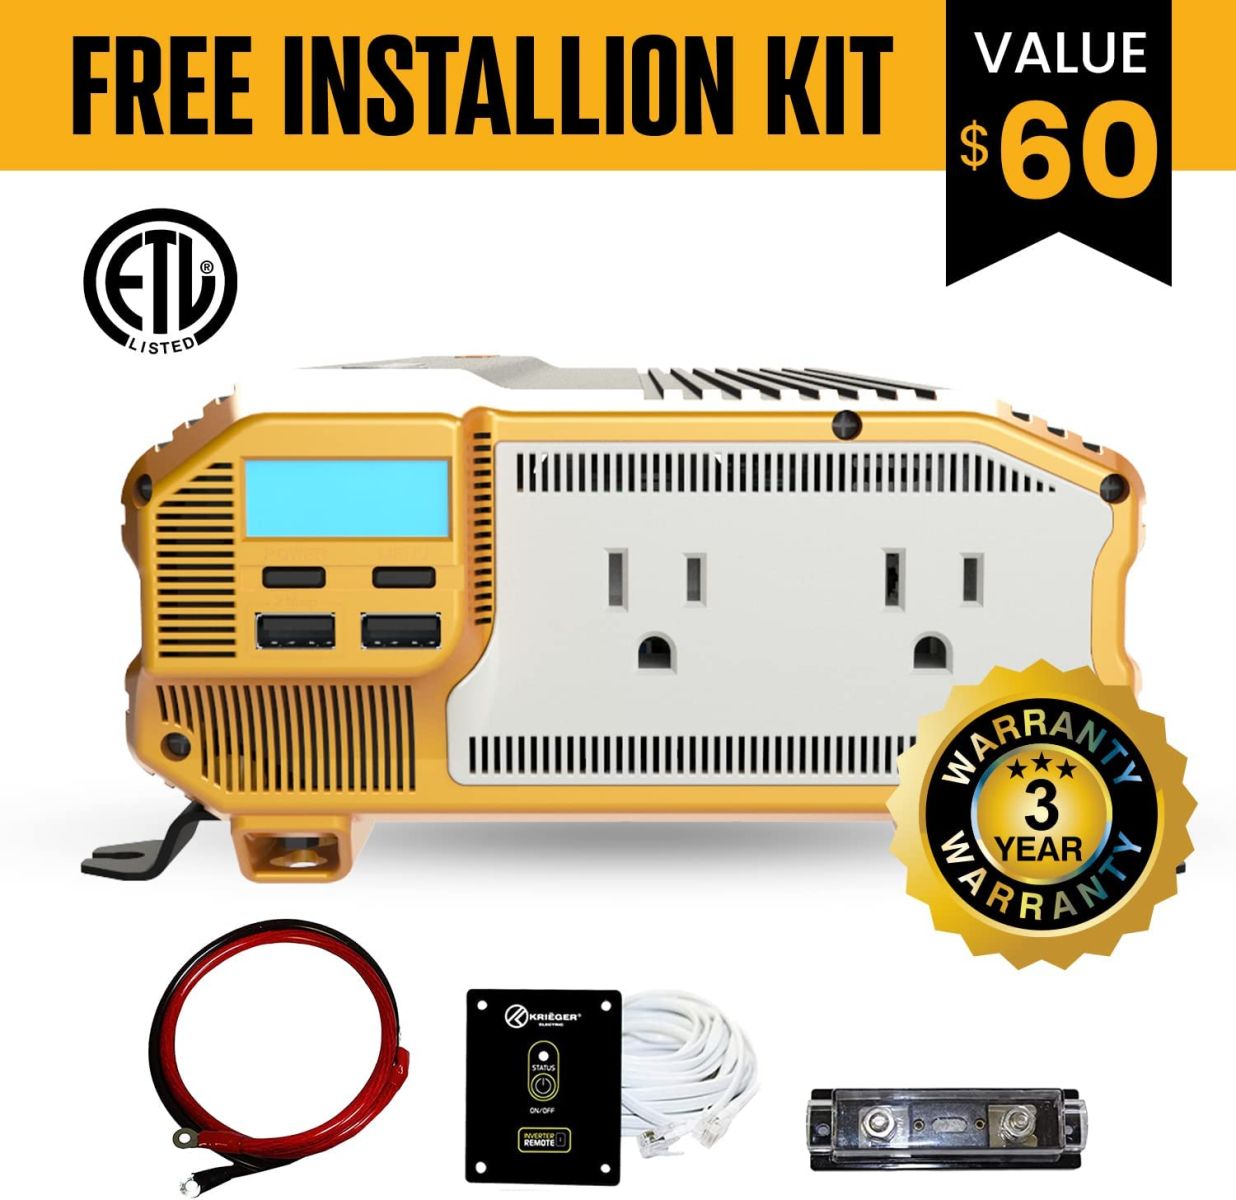 Limited Time Offer! Krieger 1100 Watt 12V Power Inverter Dual USB & 110V AC Outlets, Installation Kit Included, Vehicle Power Supply For Laptops, Televisions, Power Tools